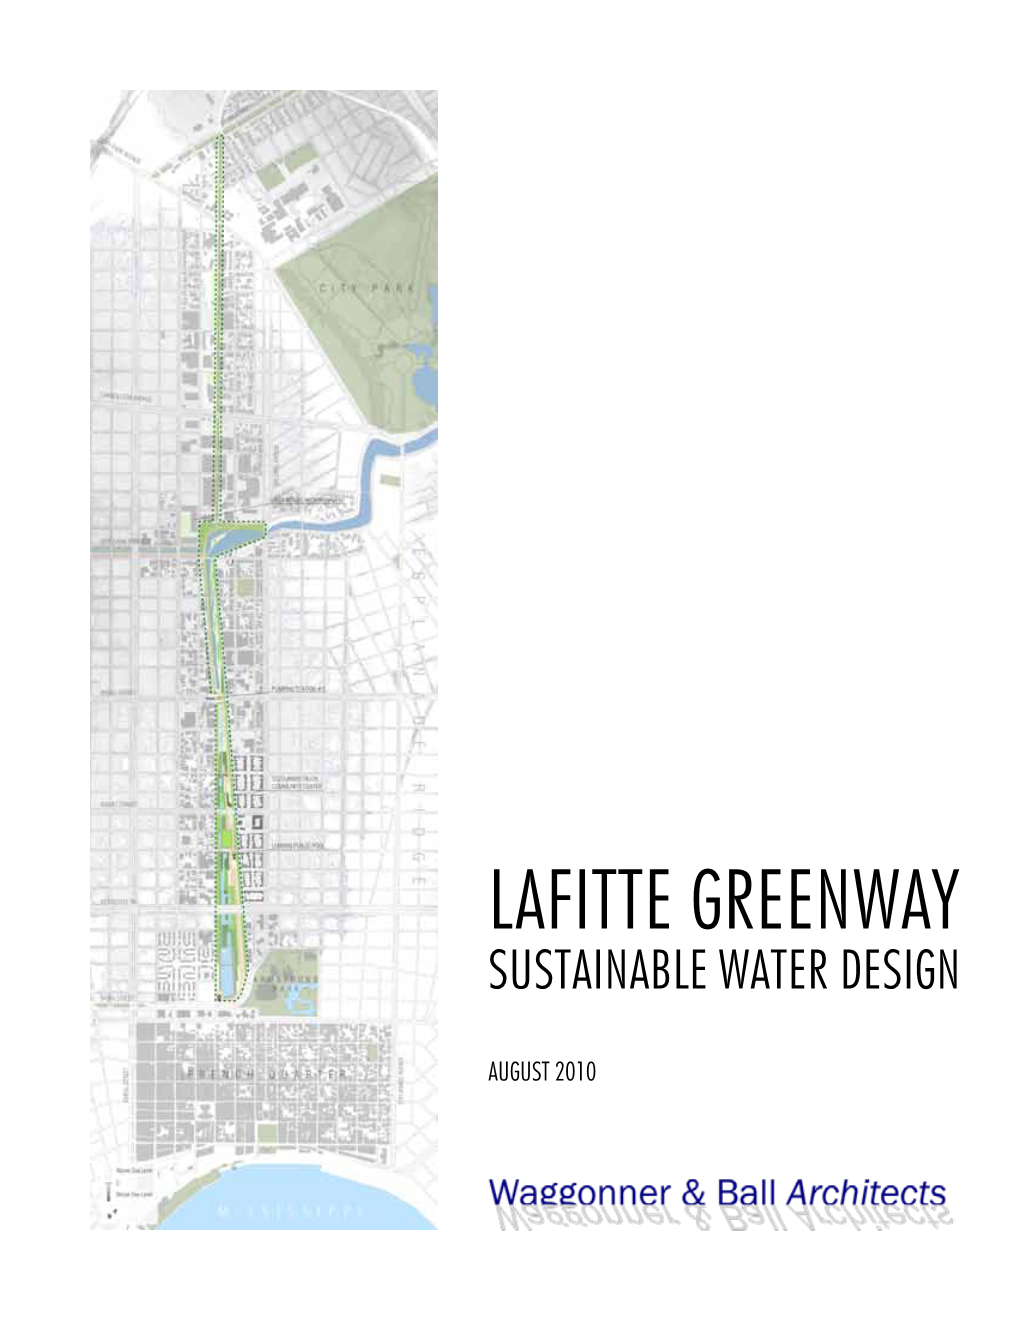 Lafitte Greenway Sustainable Water Design